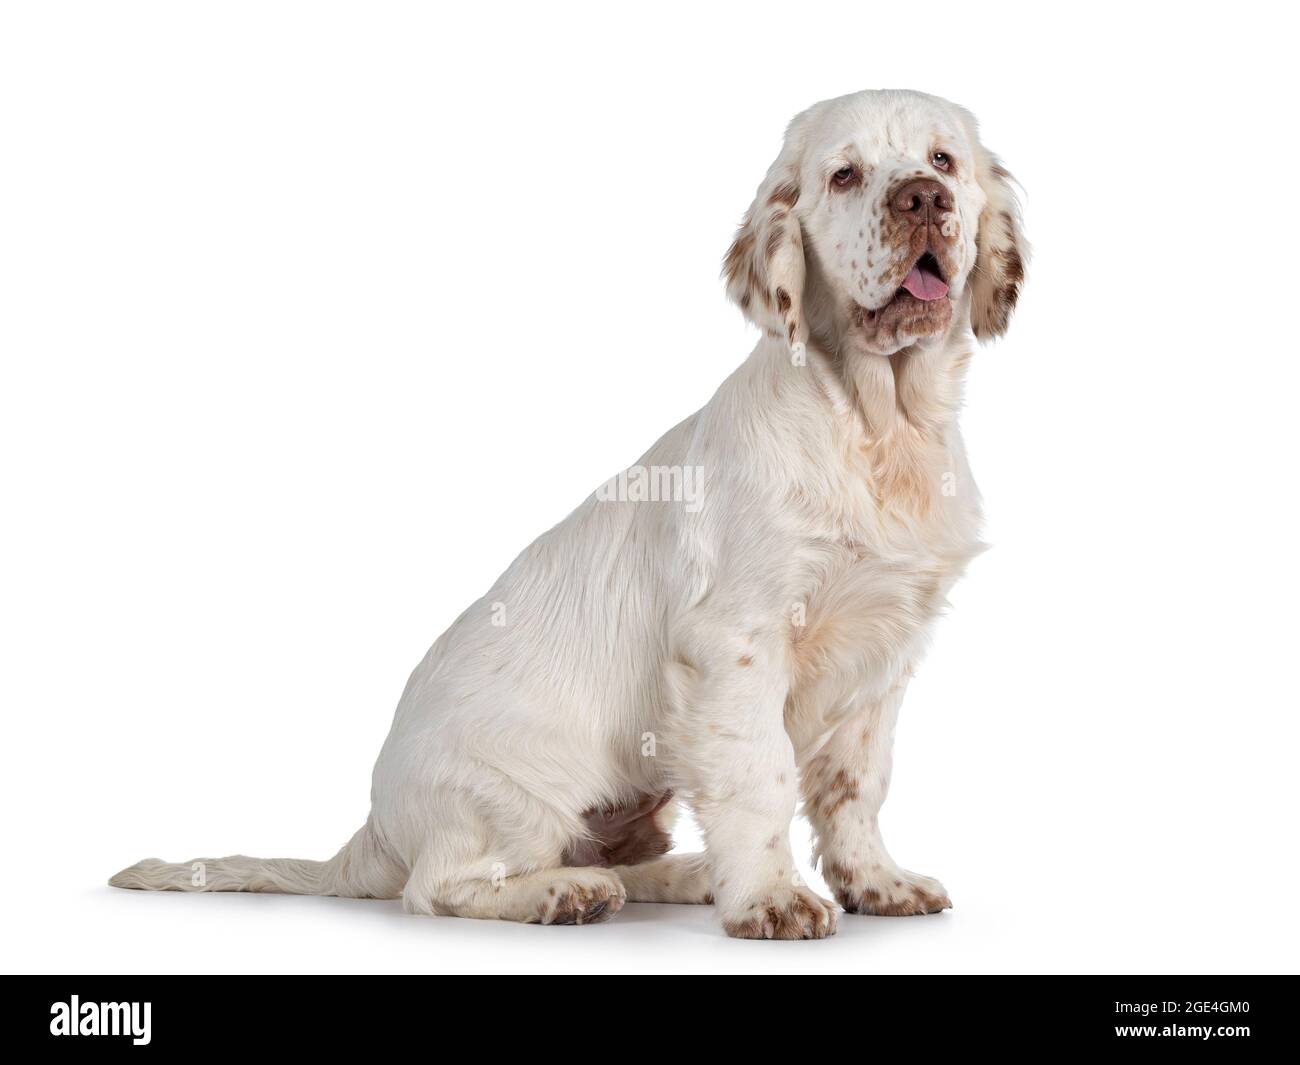 Cute Clumber Spaniel dog pup, sitting up side ways. Looking away from camera with the typical droopy eyes. Tingue out. Isolated on a white background. Stock Photo